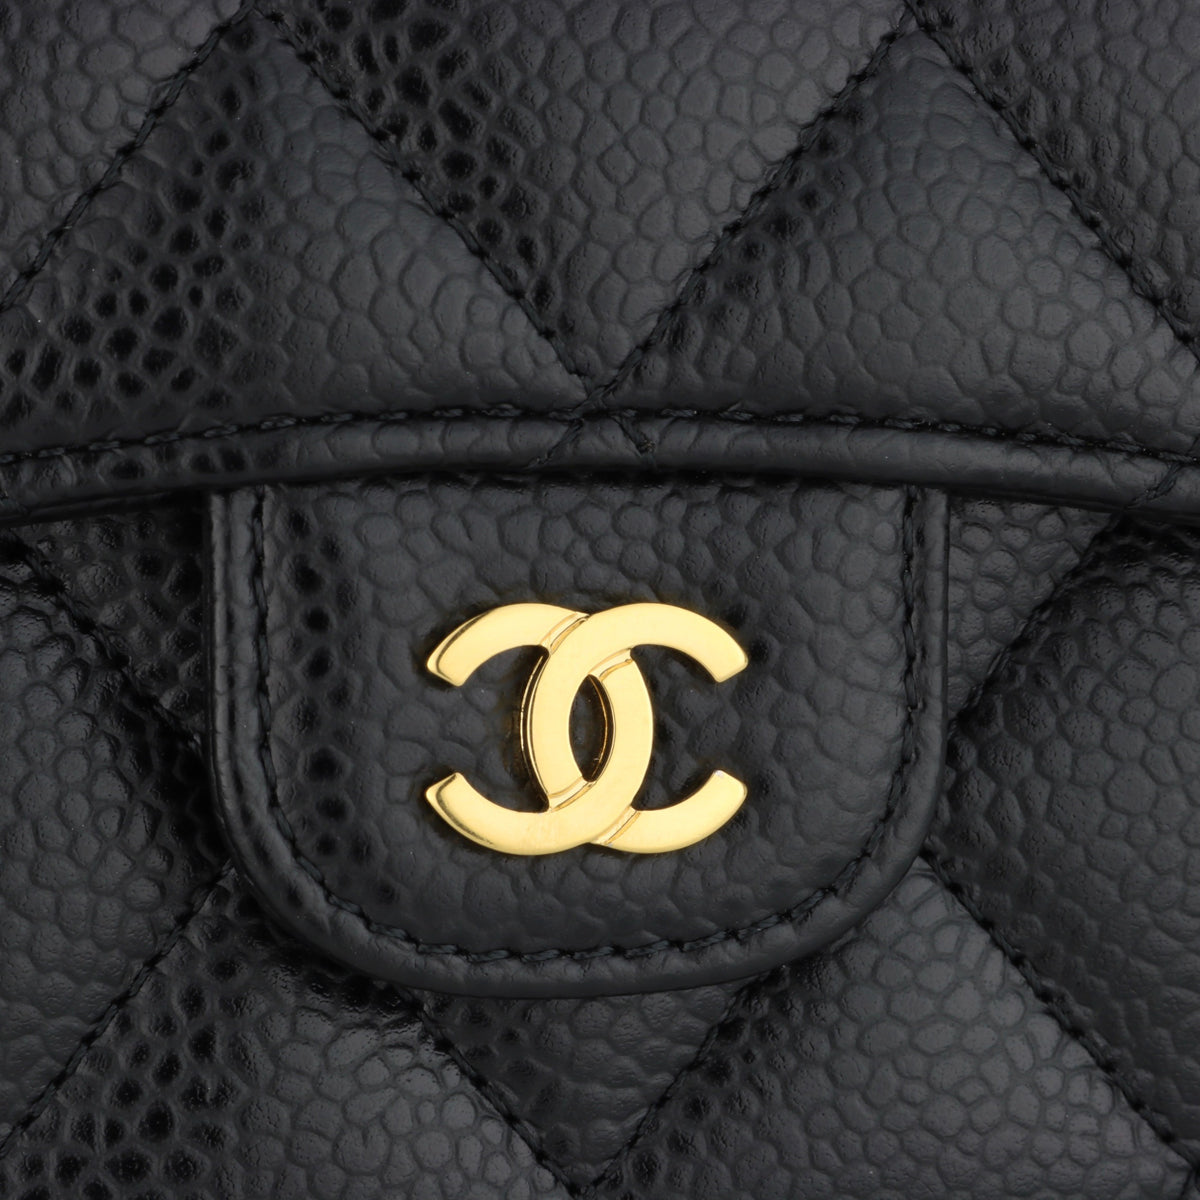 Chanel Quilted Classic Small Flap Wallet Black Caviar Gold Hardware 20